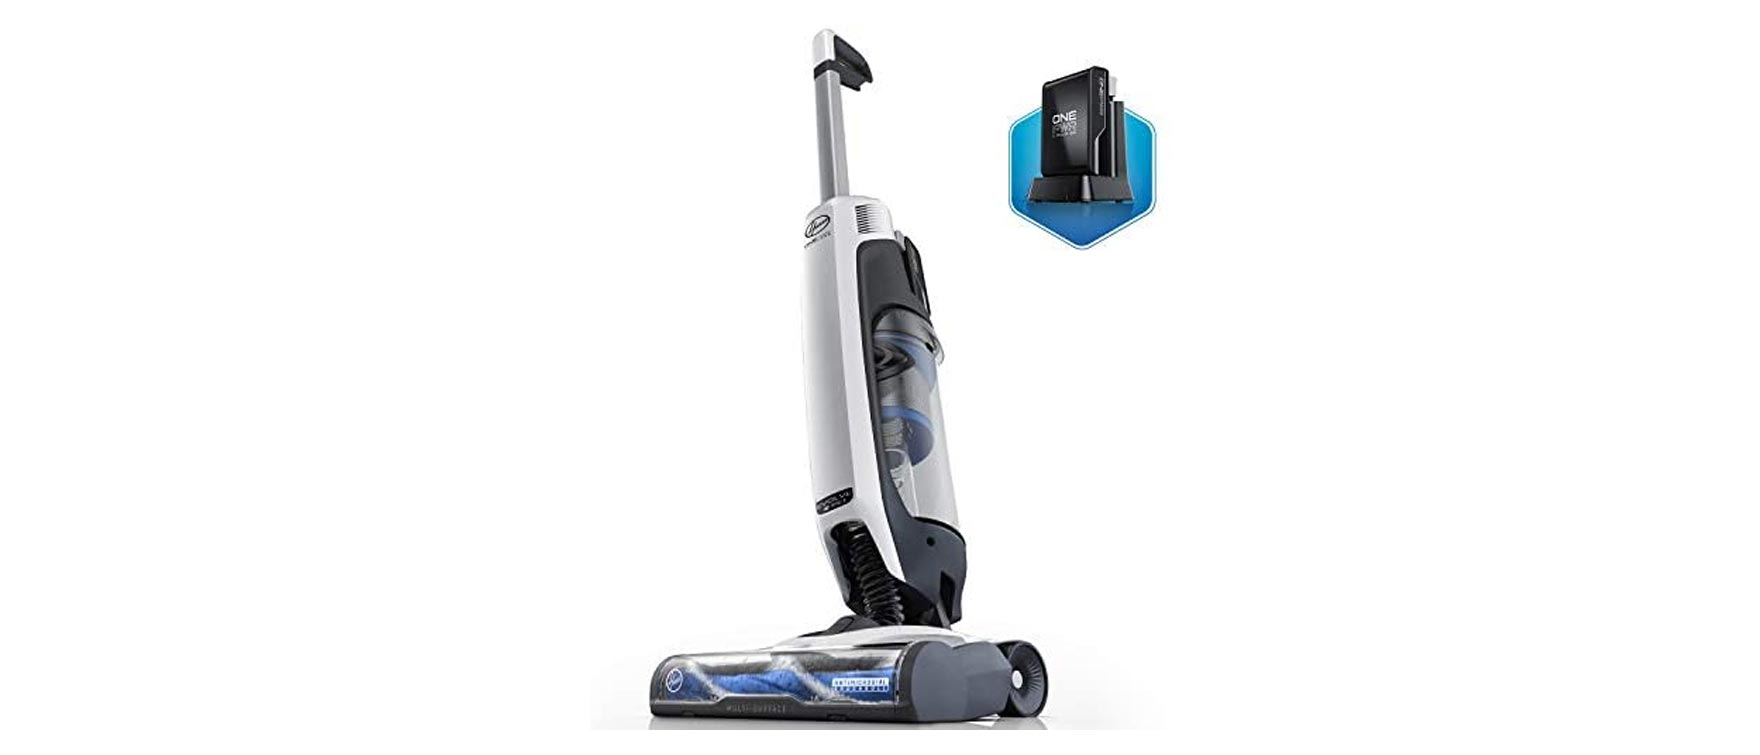 9. Hoover ONEPWR Evolve Pet Cordless Small Upright Vacuum Cleaner